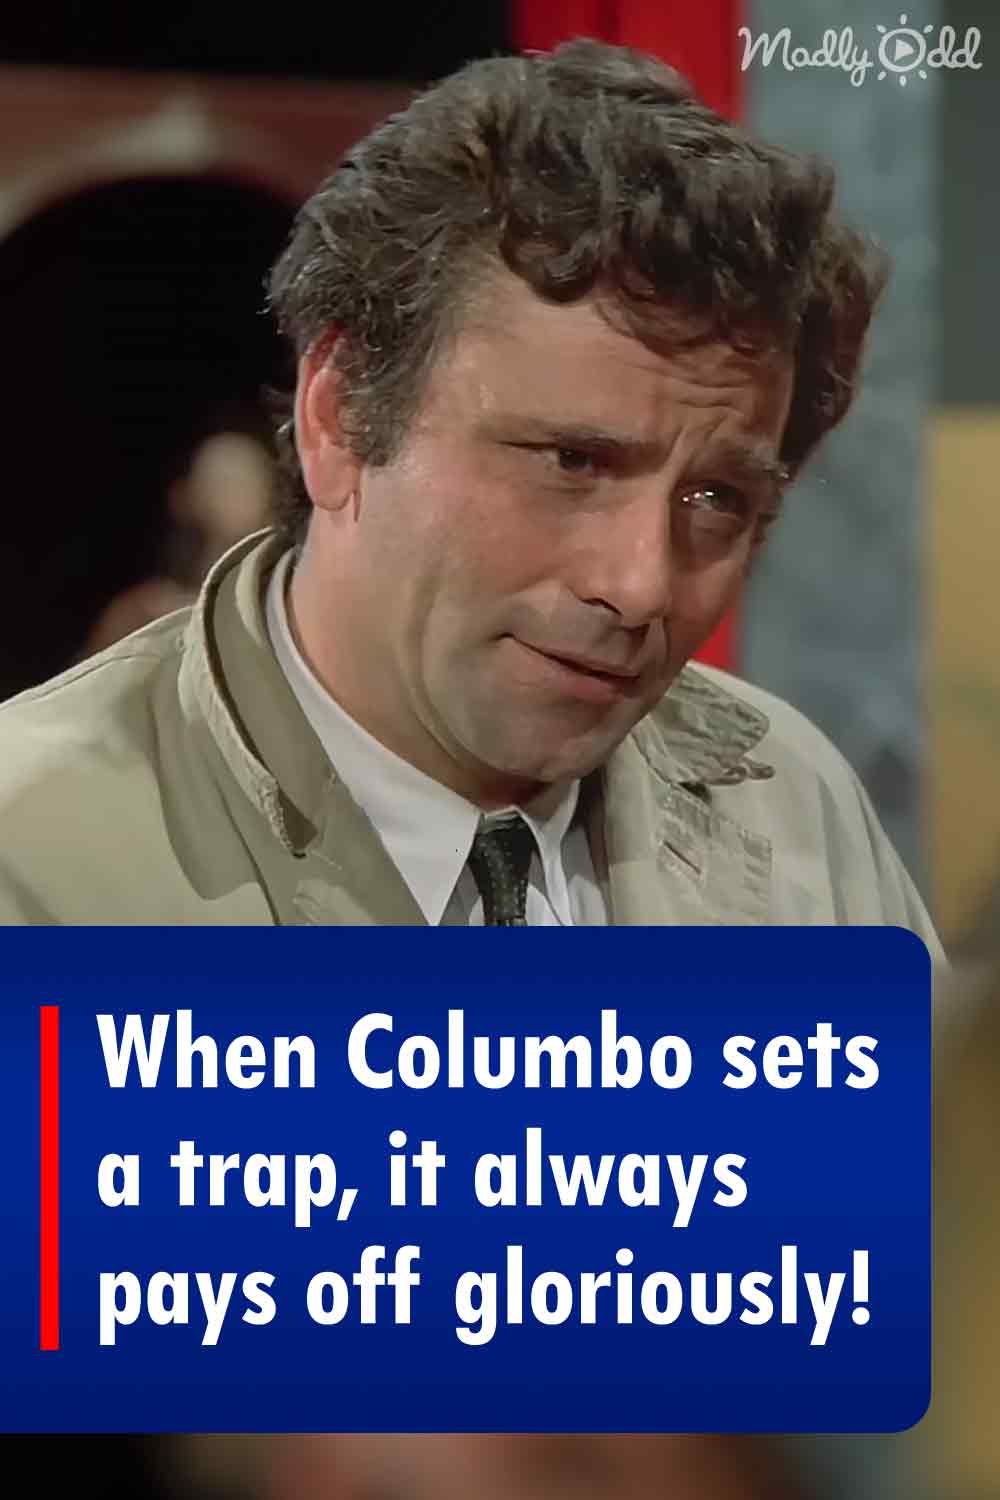 When Columbo sets a trap, it always pays off gloriously!